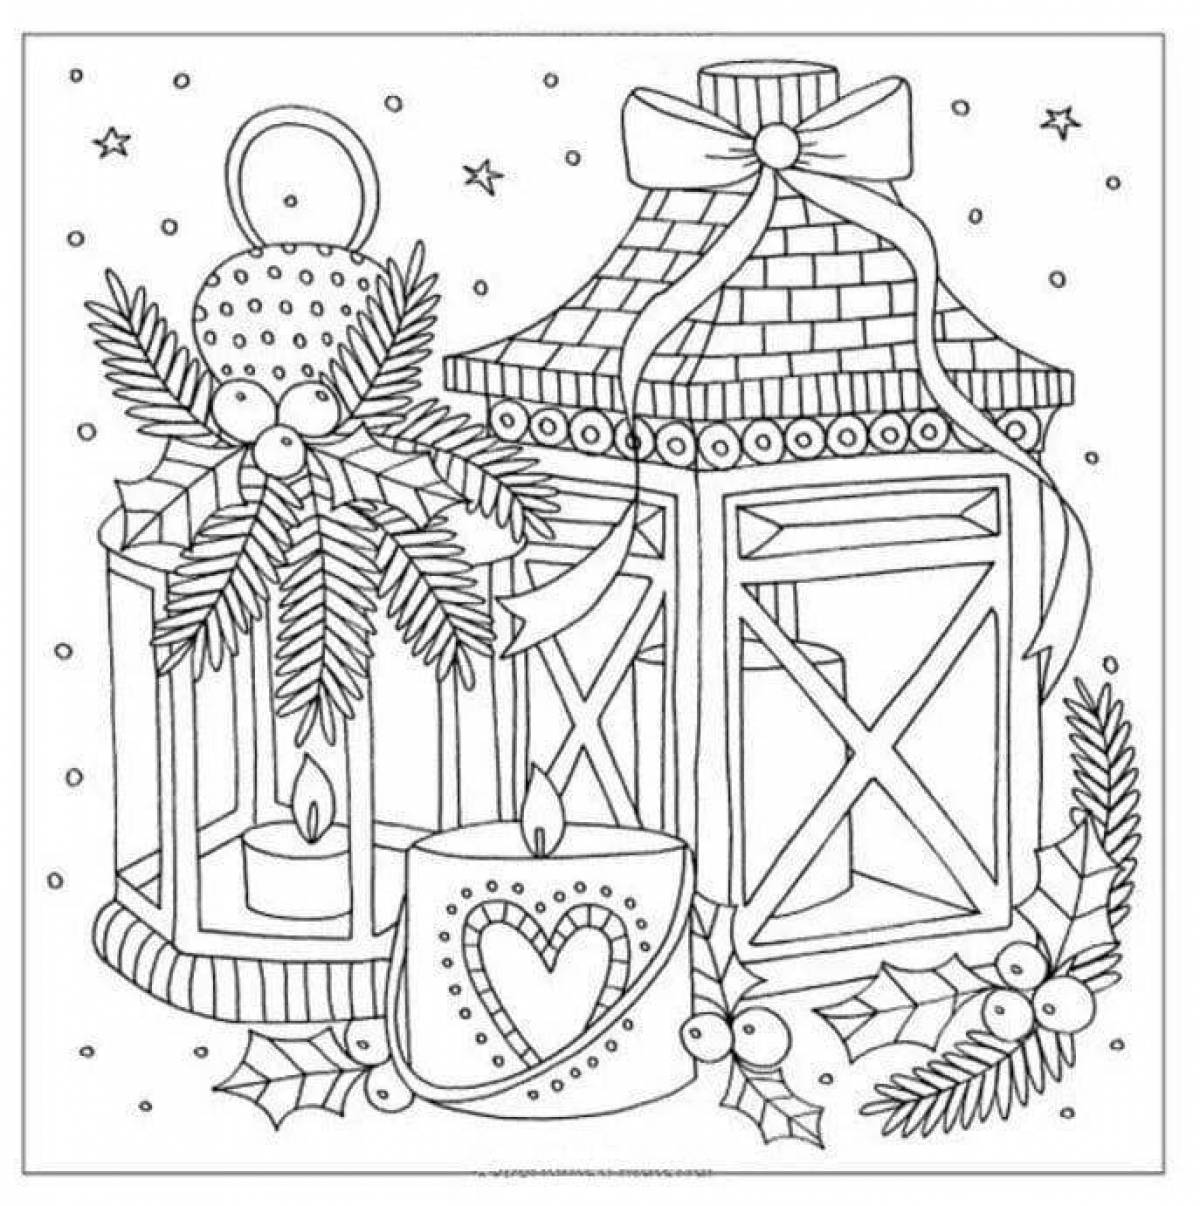 Blessed Christmas miracles coloring page